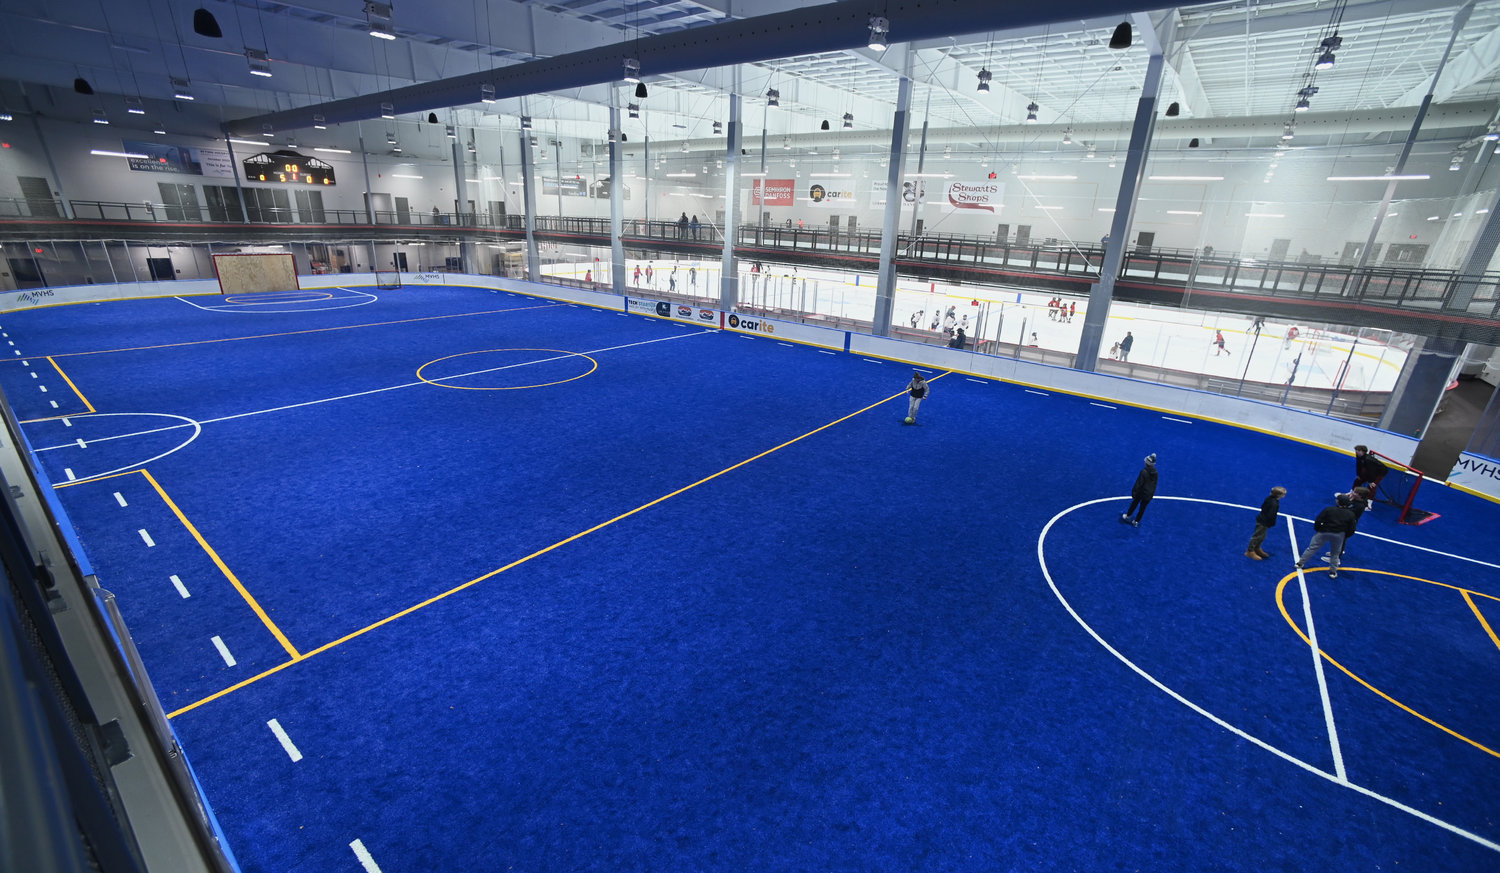 Interior of soccer floor with hocky rink in the background at the Nexus Center on Feb. 1.